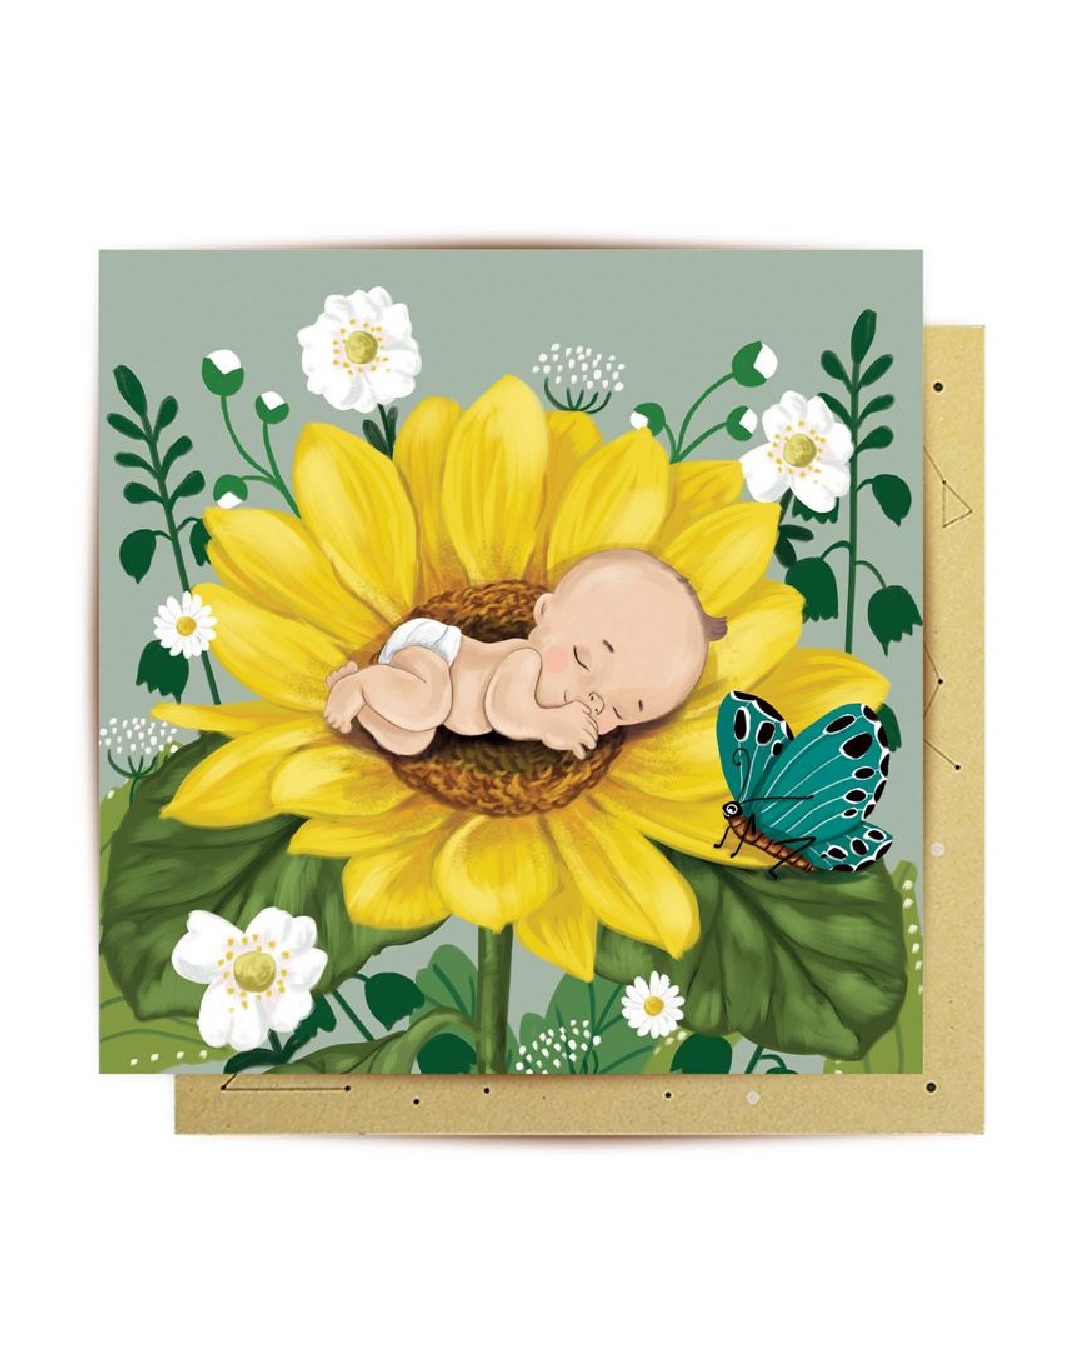 Baby in a yellow flower